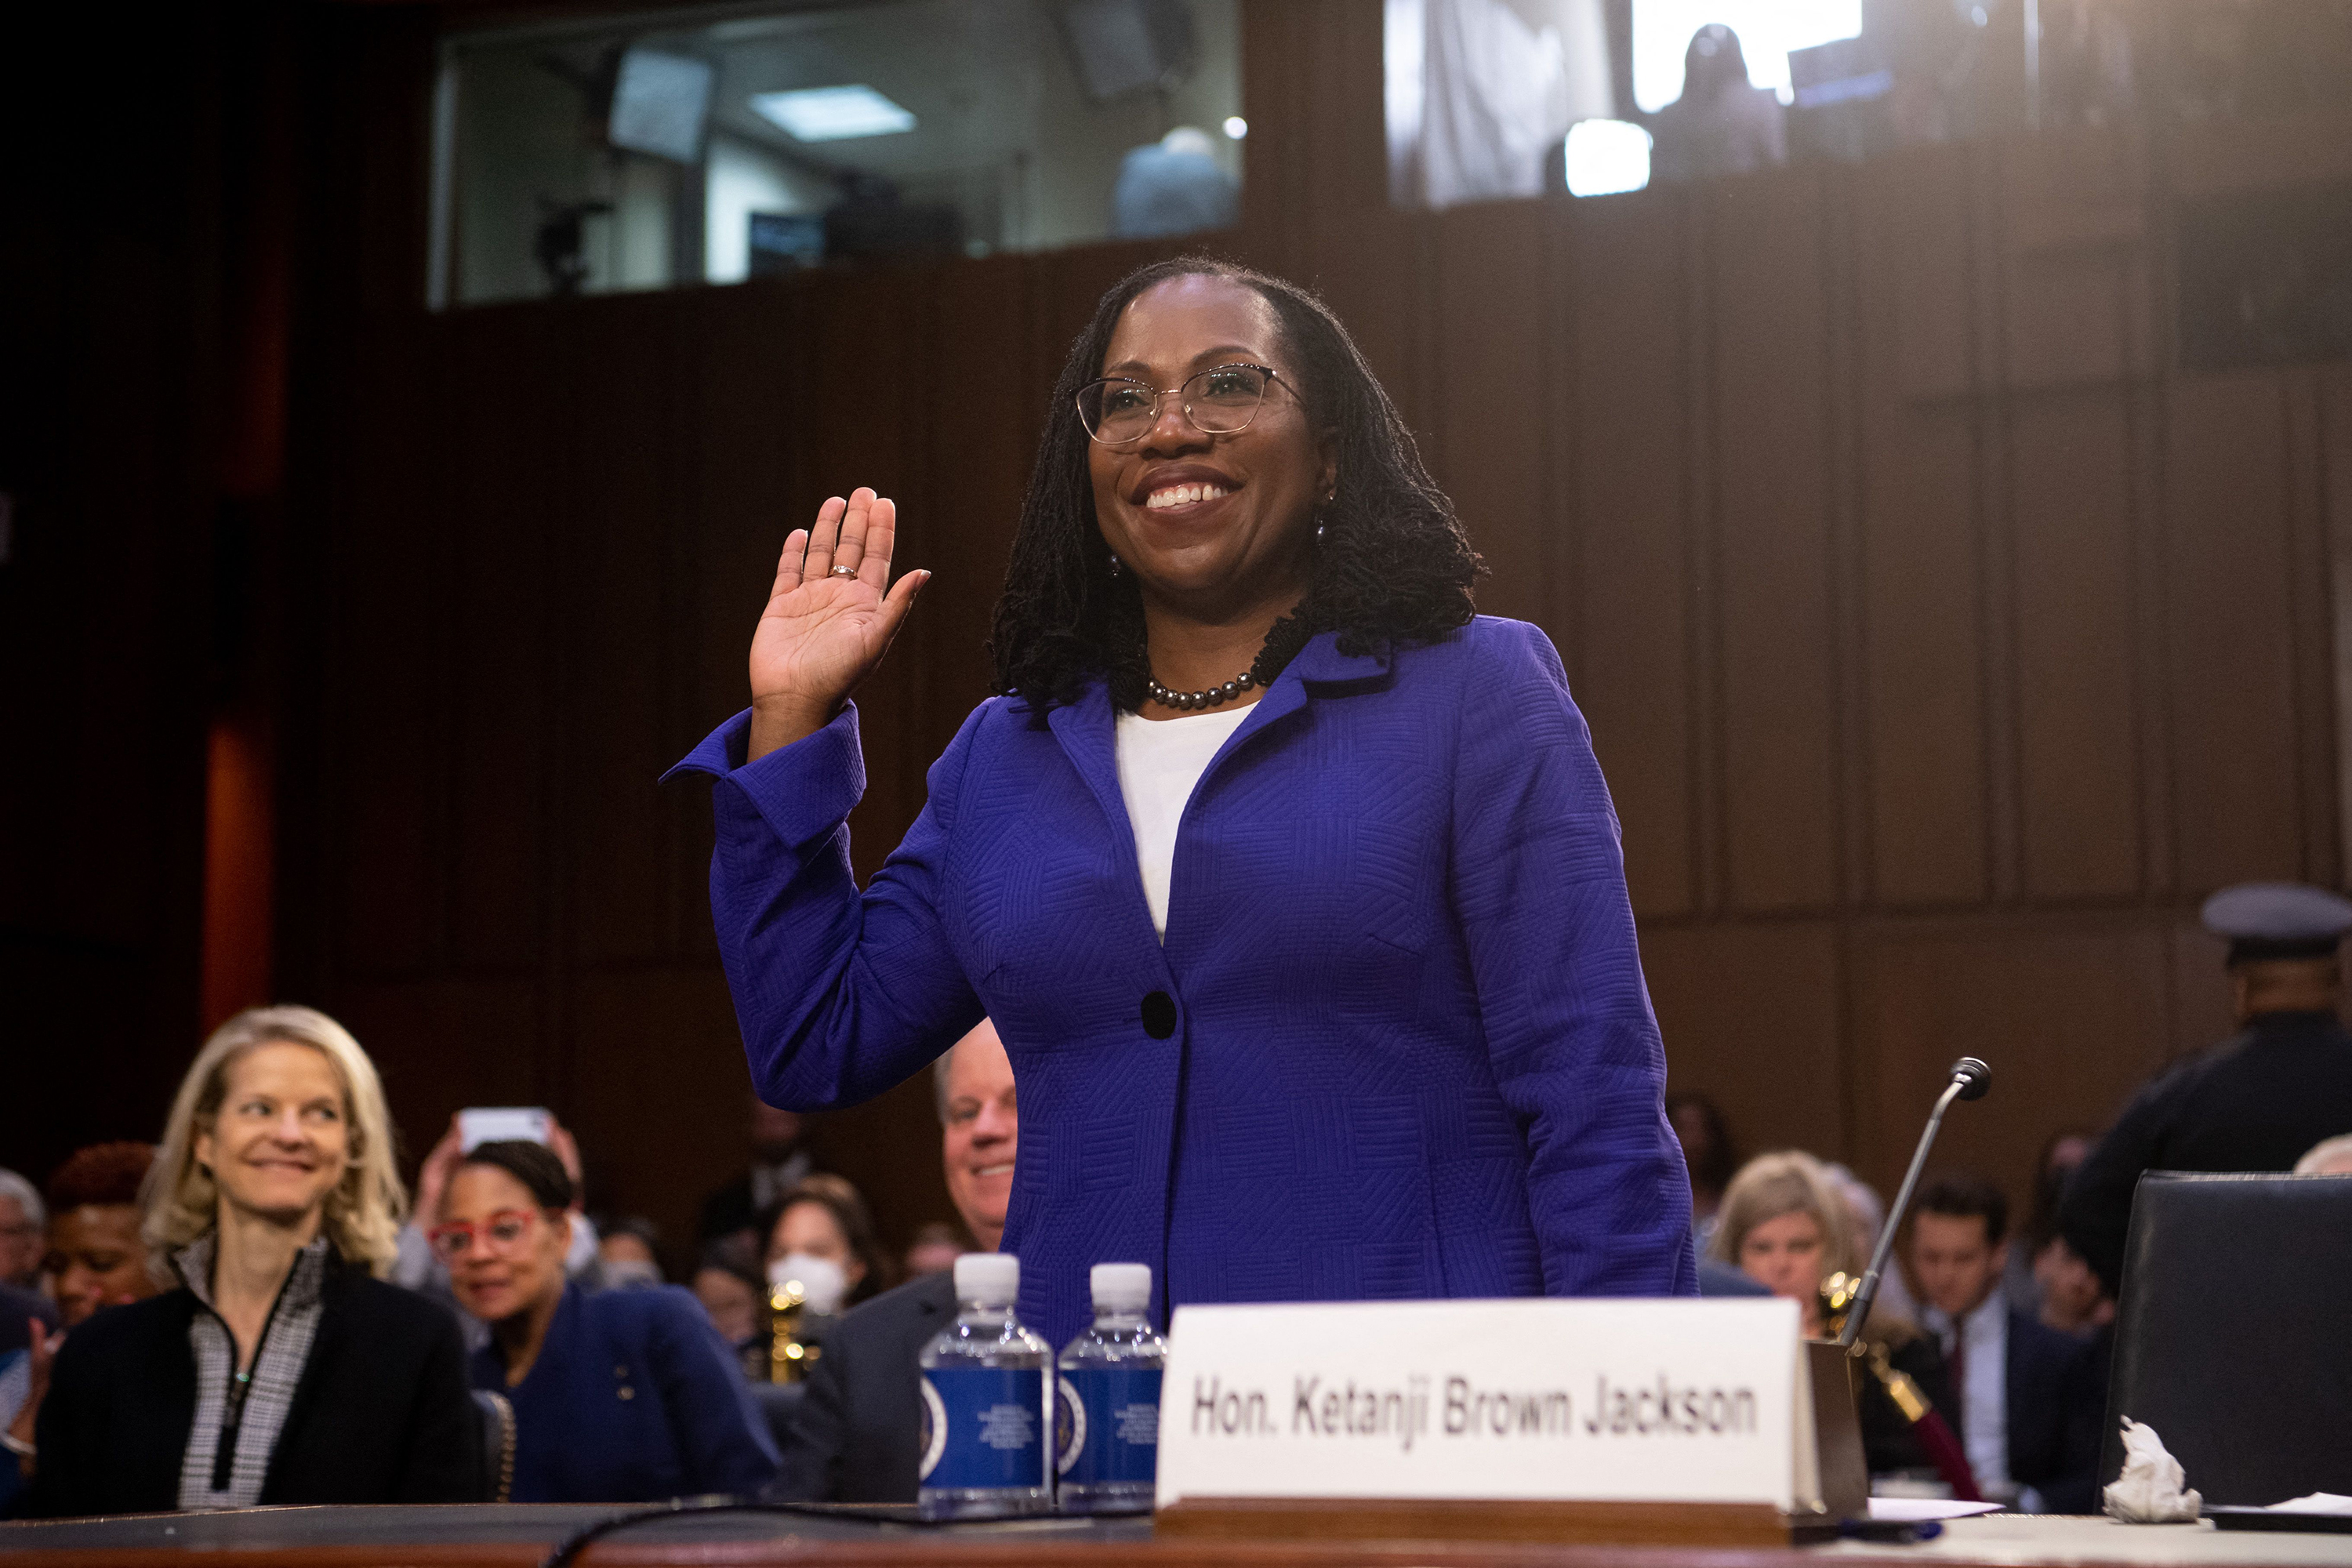 Ketanji Brown Jackson is sworn in during a Senate Judiciary Committee confirmation hearing in Washington, DC on March 21.